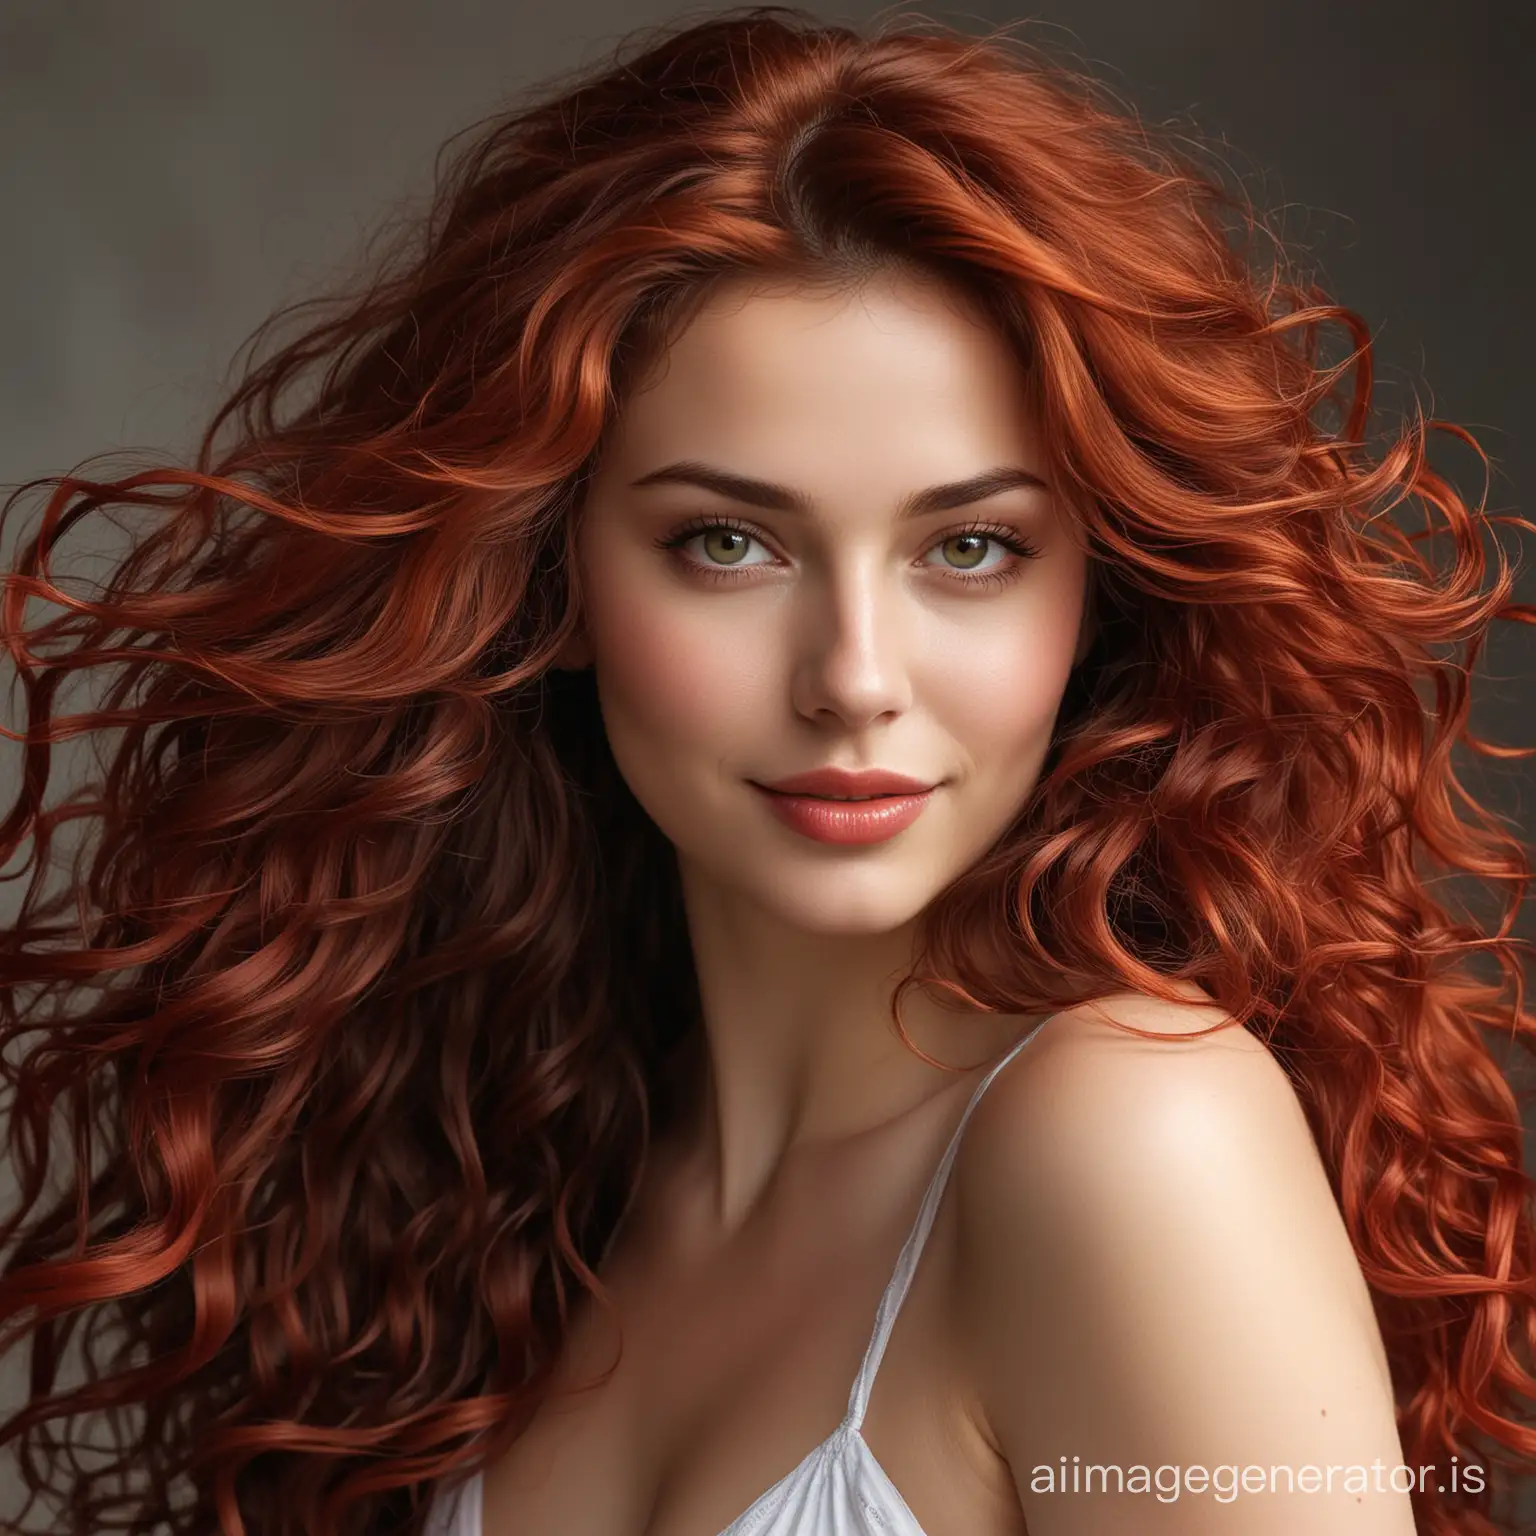 Radiant-Woman-with-Fiery-Red-Hair-and-Captivating-Smile